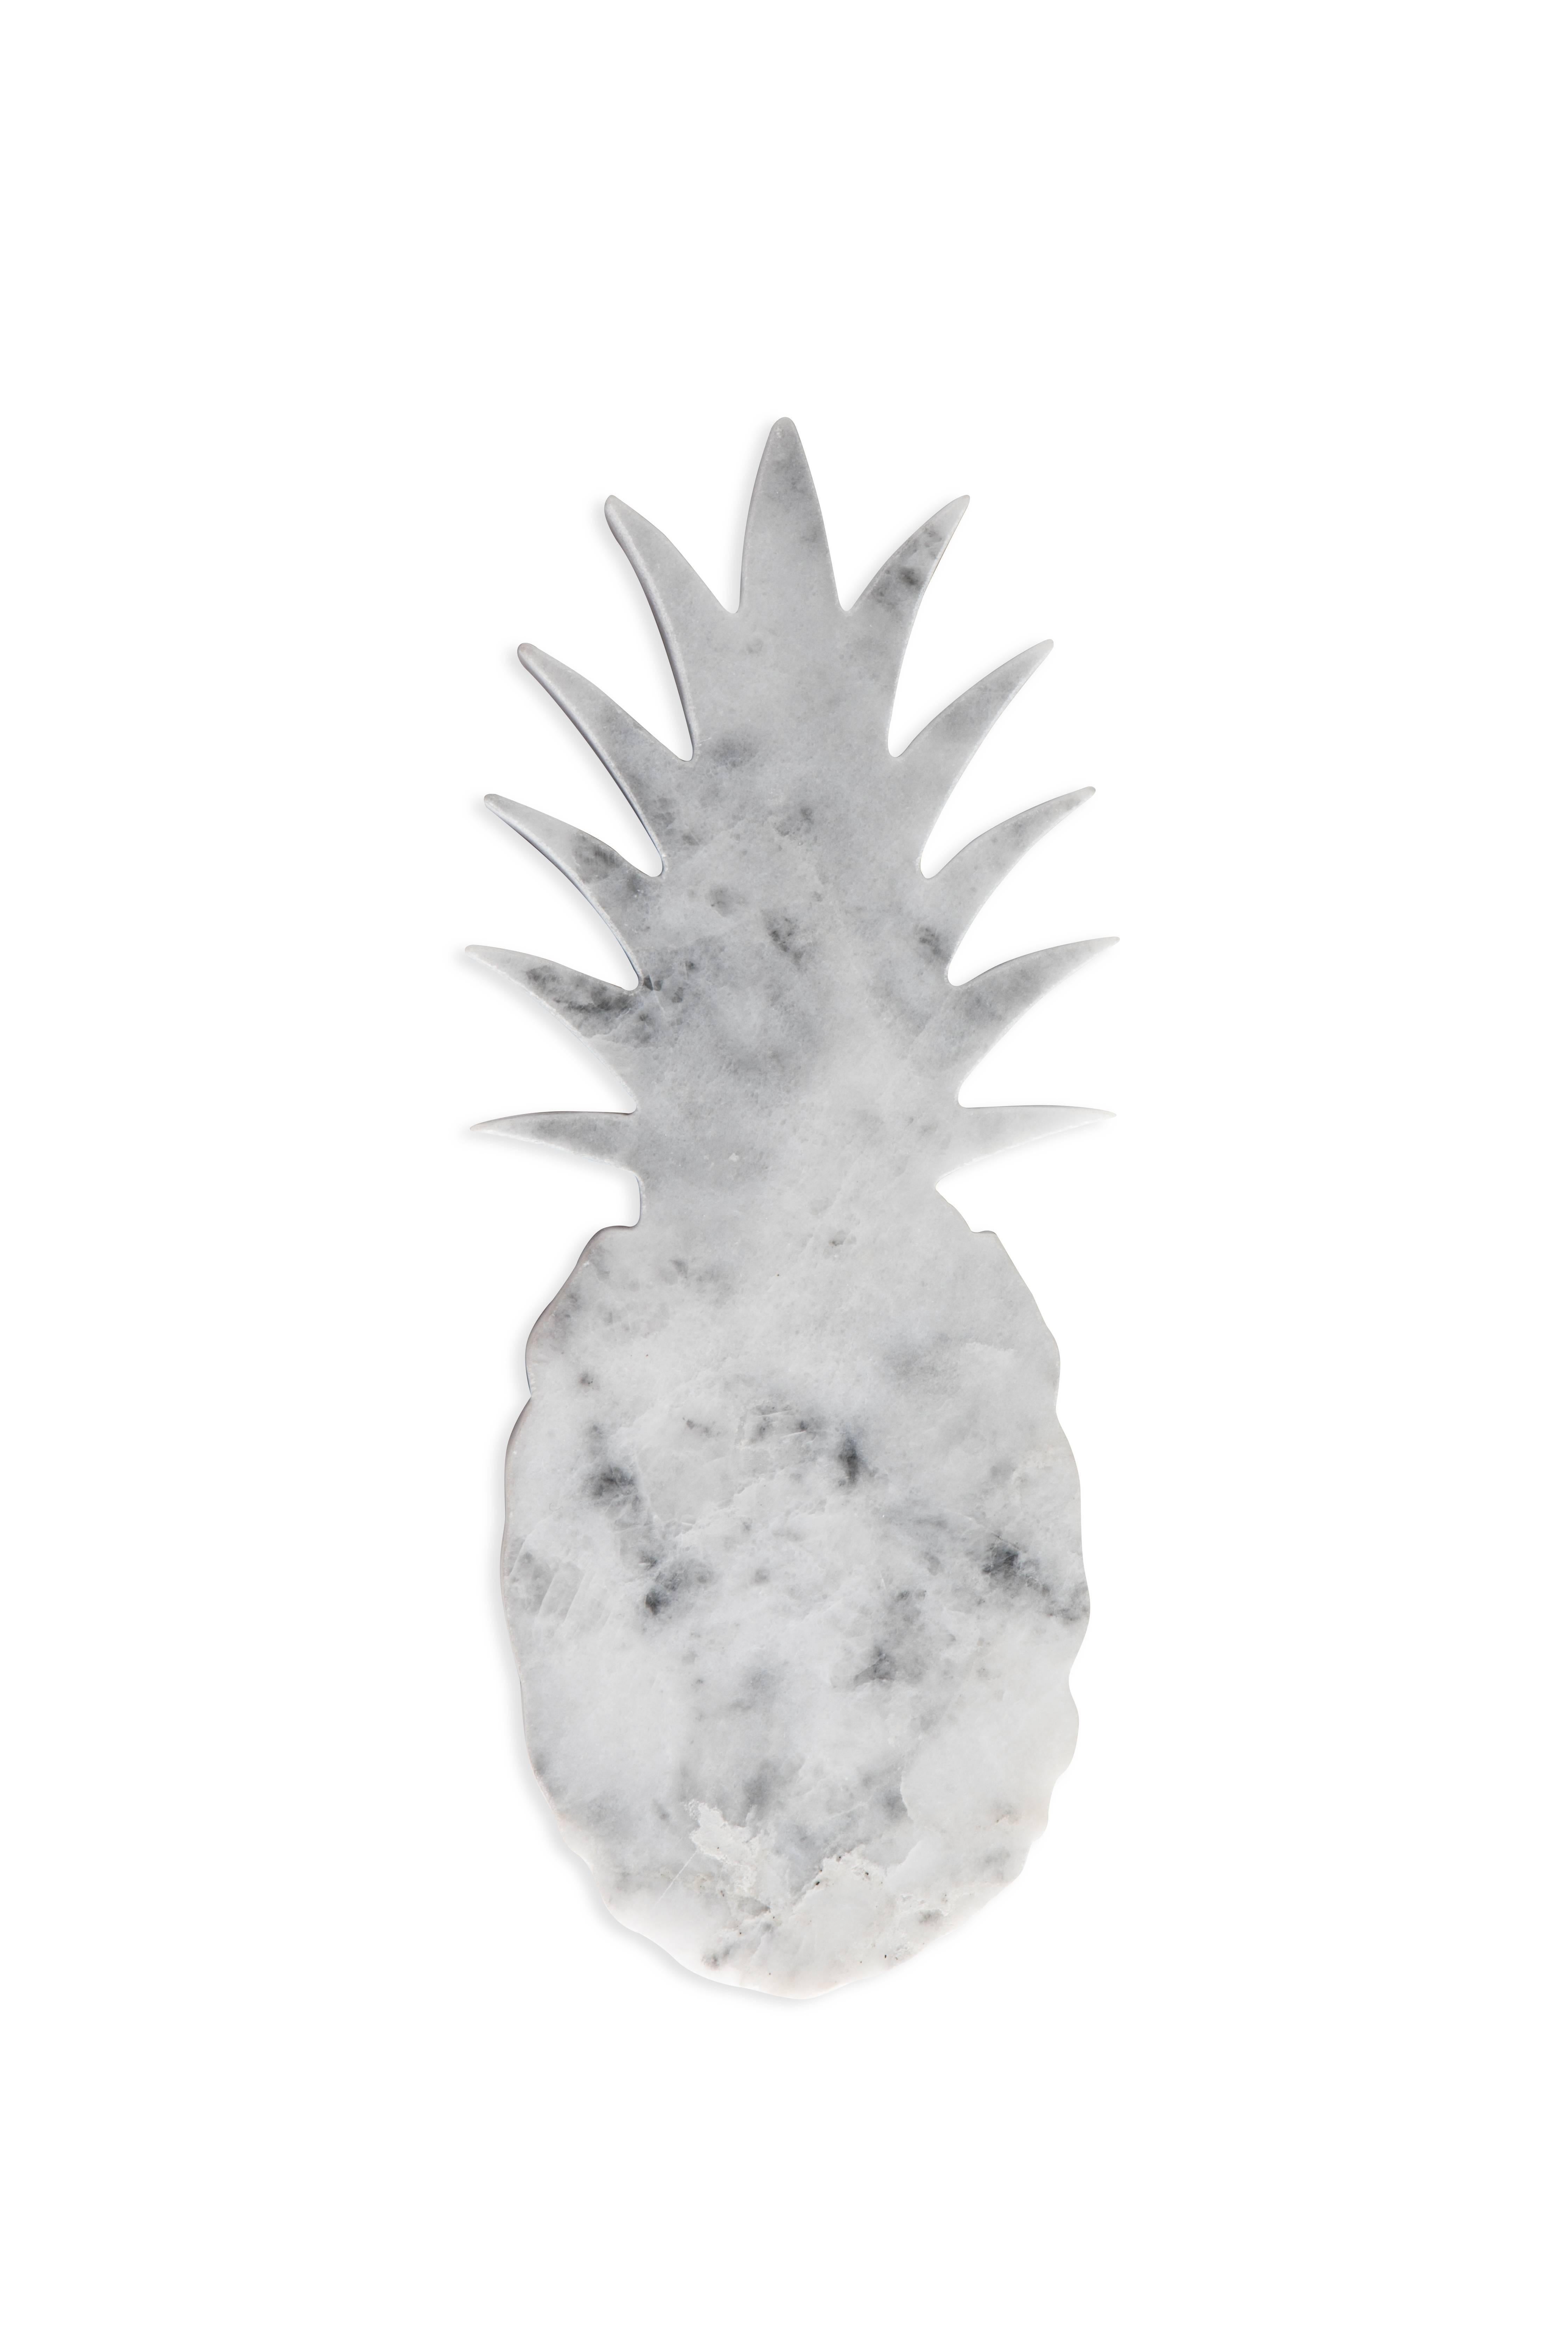 Small white Carrara marble paperweight with pineapple shape. Each piece is in a way unique (since each marble block is different in veins and shades) and handcrafted in Italy. Slight variations in shape, color and size are to be considered a